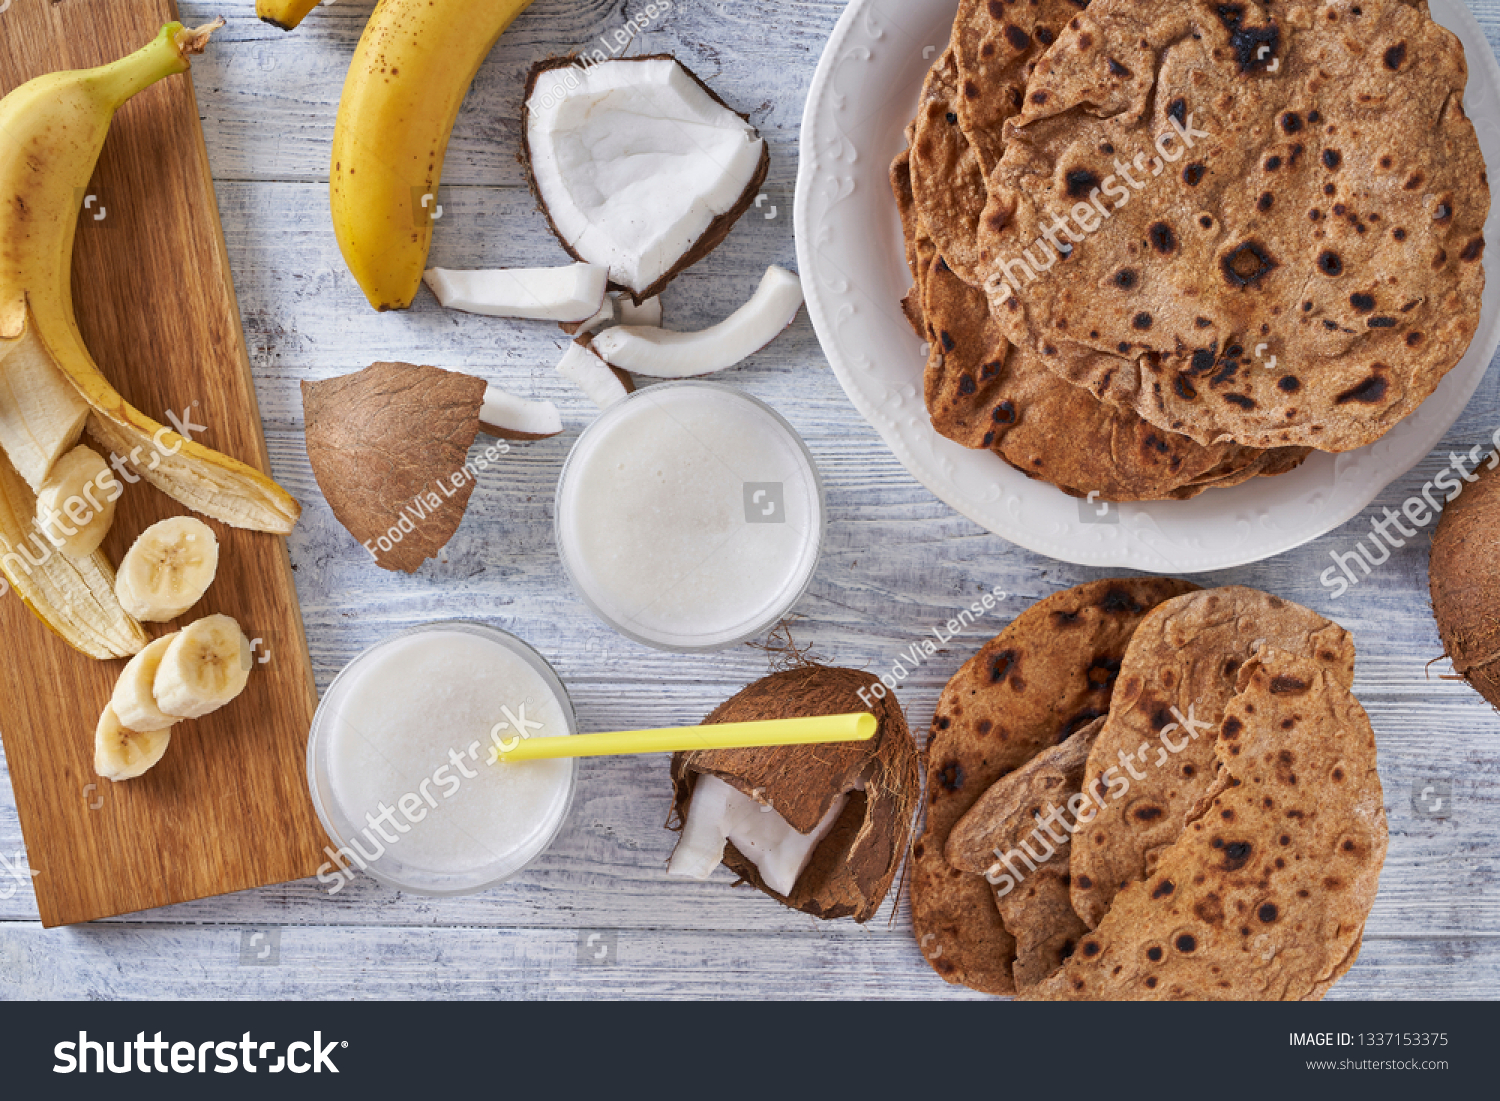 Close up on whole wheat asian flatbread roti with lactose free coconut milk and ripe banana on a cutting board, top view, flat lay, horizontal #1337153375